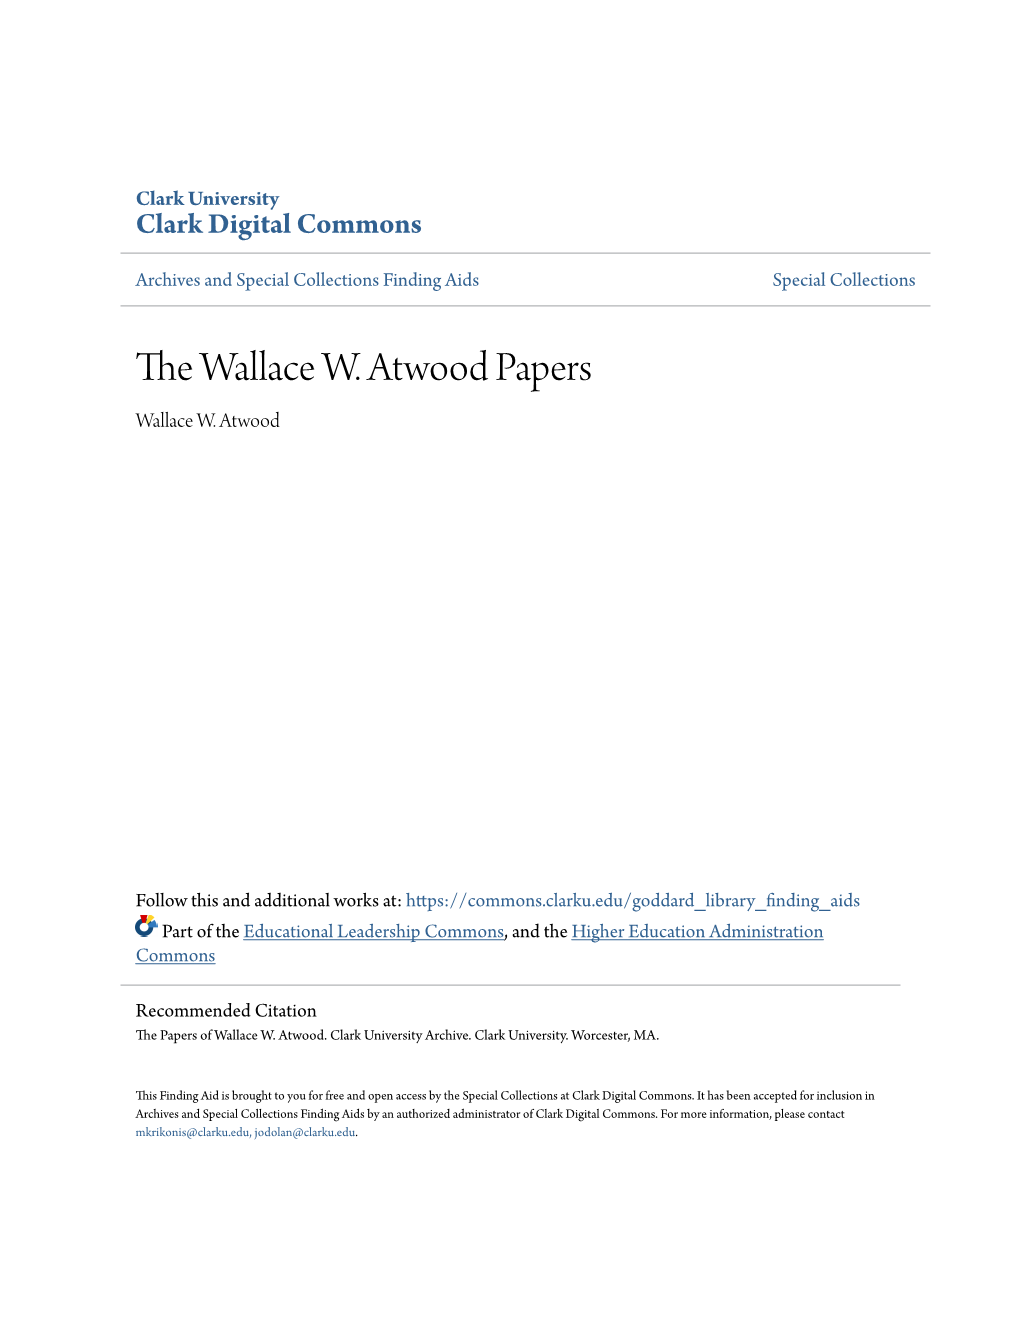 The Wallace W. Atwood Papers